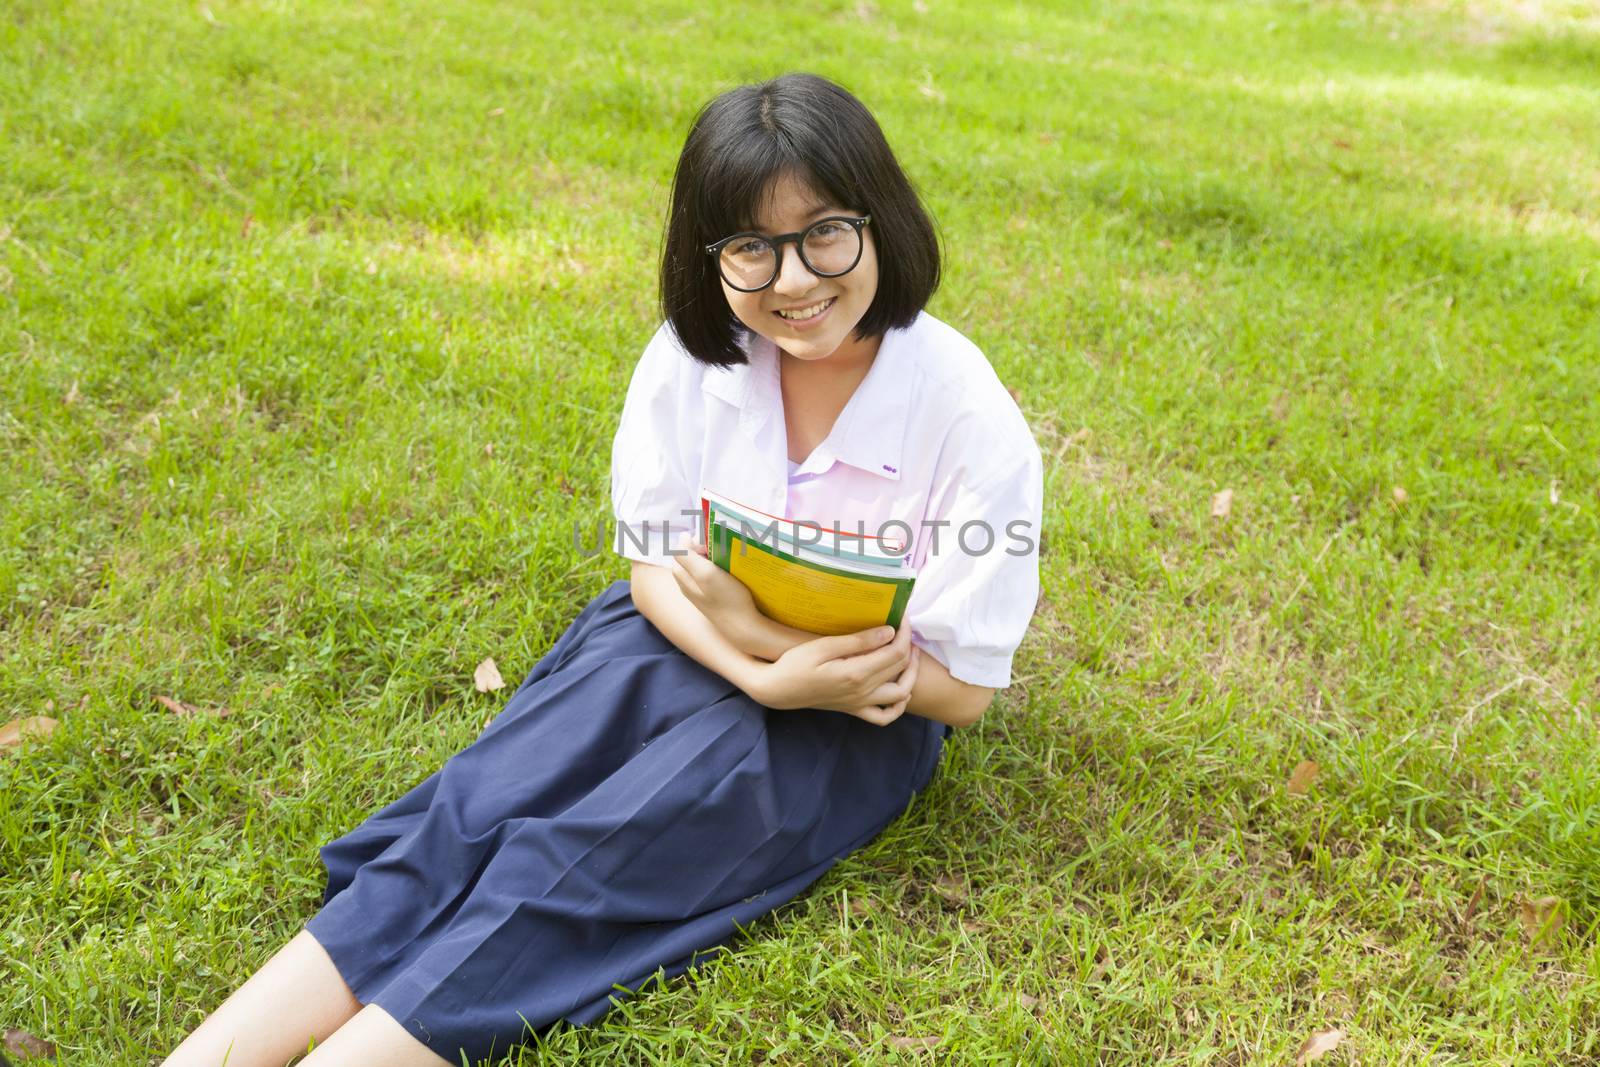 Schoolgirl holding books and smiling. Sitting on grass in the park.